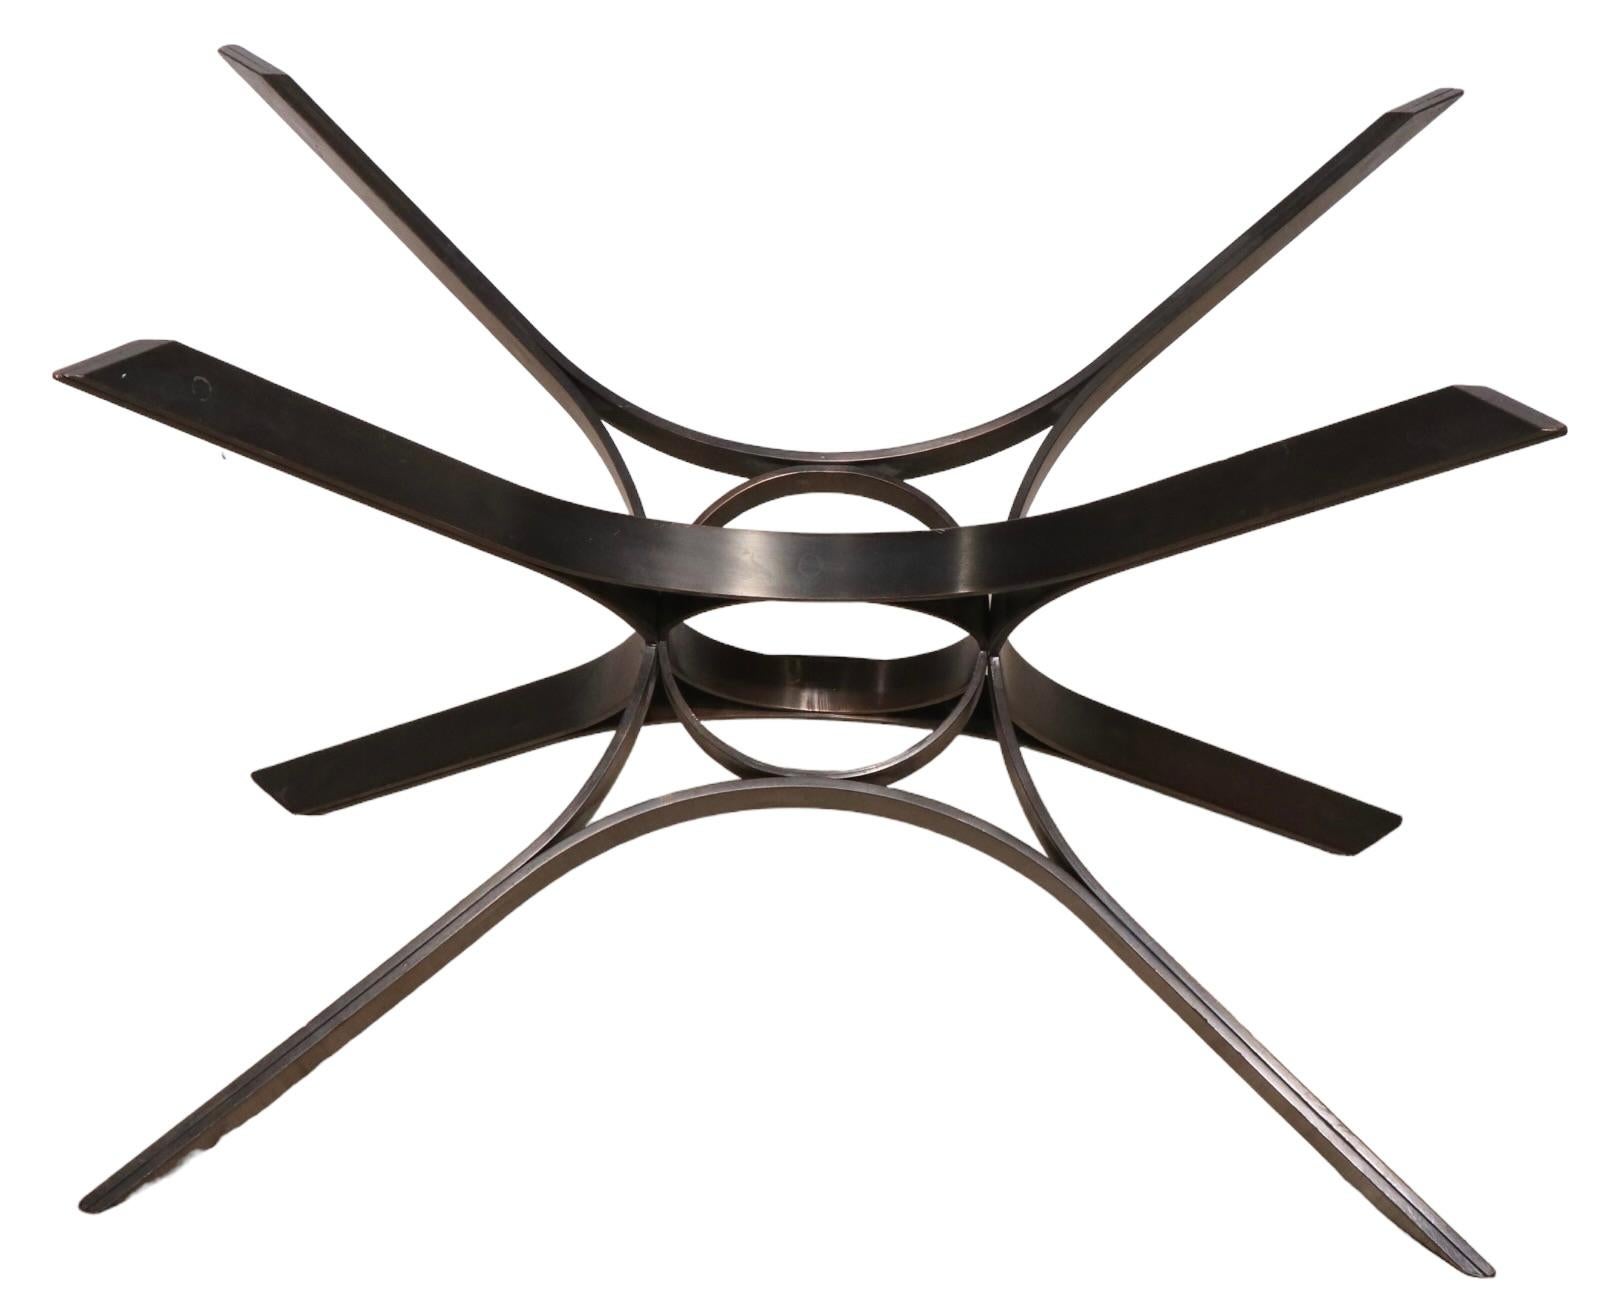 Chic, voguish, and sophisticated coffee table designed bye Roger Sprunger for Dunbar circa 1970's. This version features an architectural metal star form base of solid bronze, which supports its original tinted plate glass top. Hard to find the